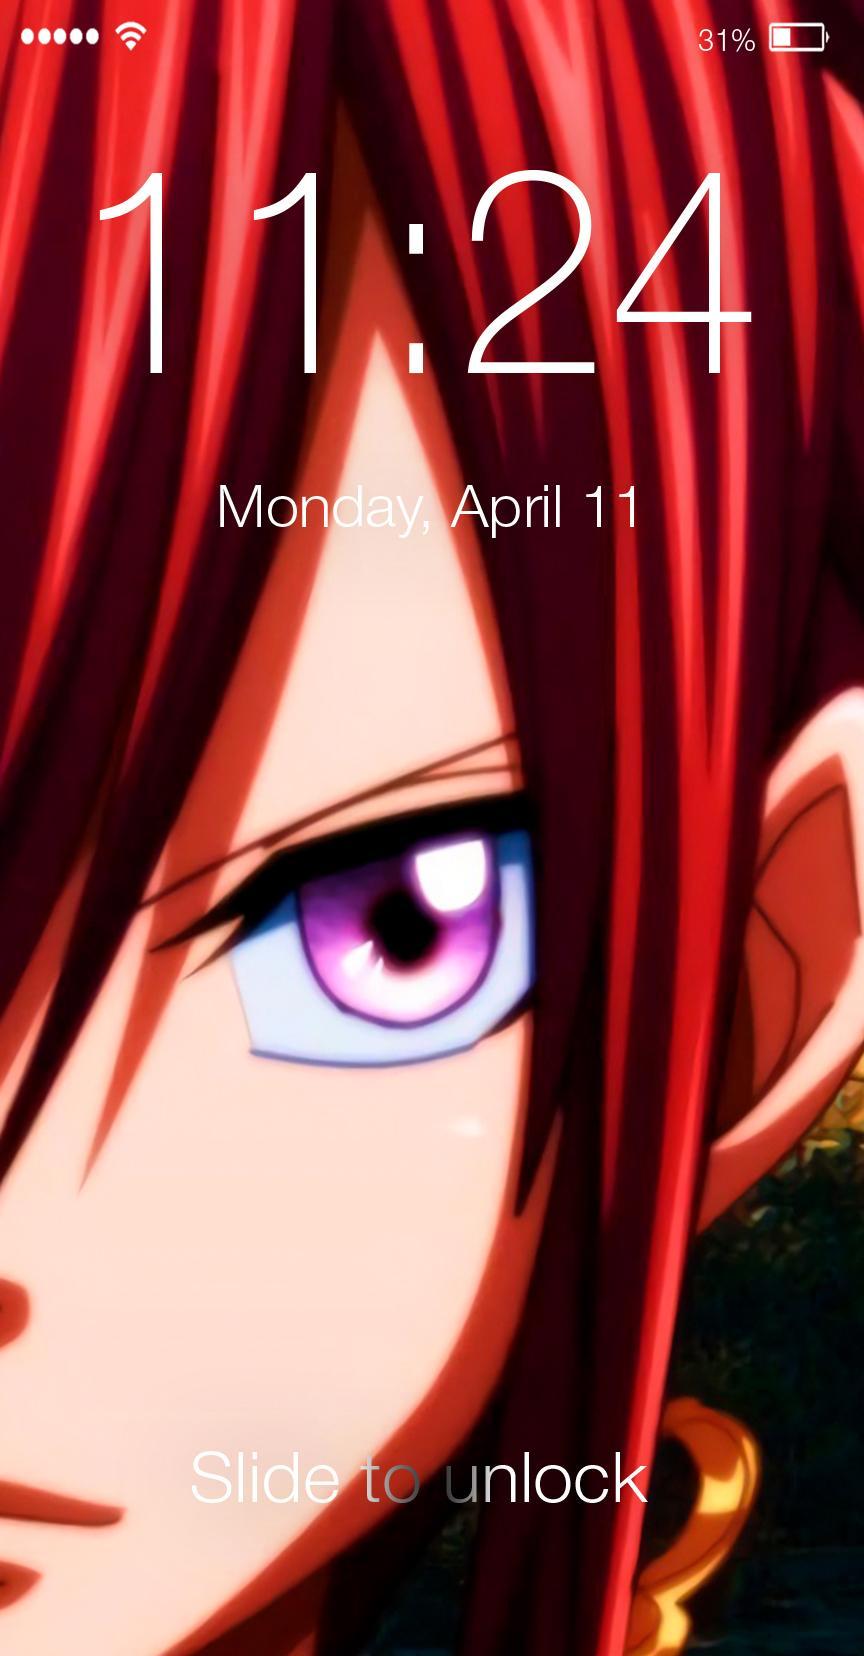 Fairy Tail Wallpaper Discover more August, Fairy Tail, Hiro Mashima,  Japanese, July wallpapers.